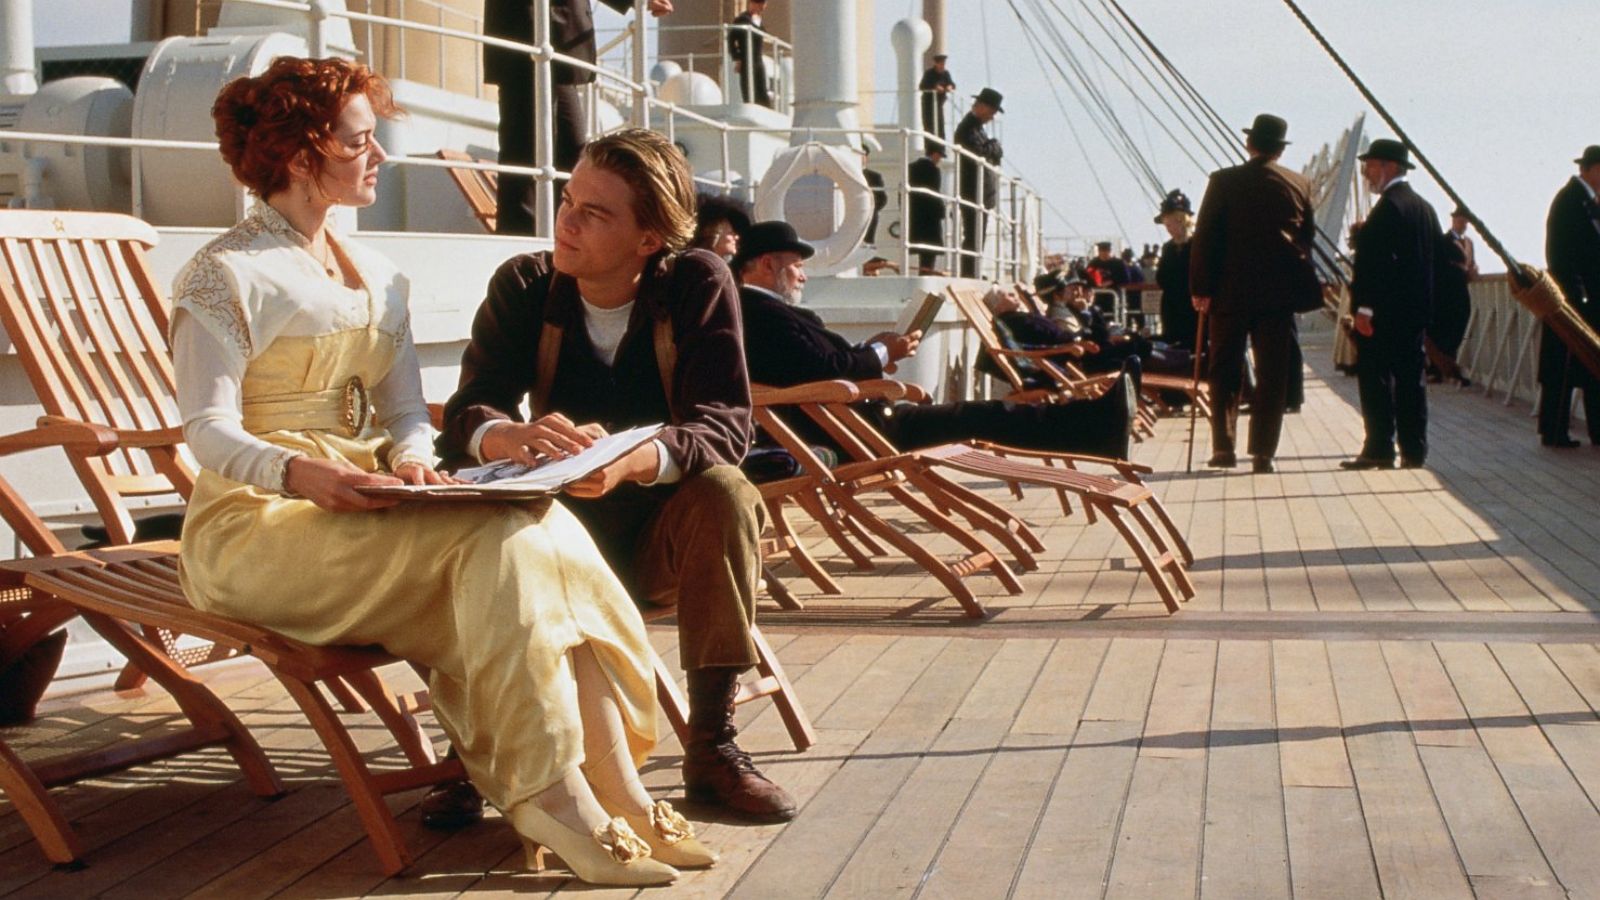 Ill-fated 'Titanic' love story has audiences still watching 20 years later  - ABC News